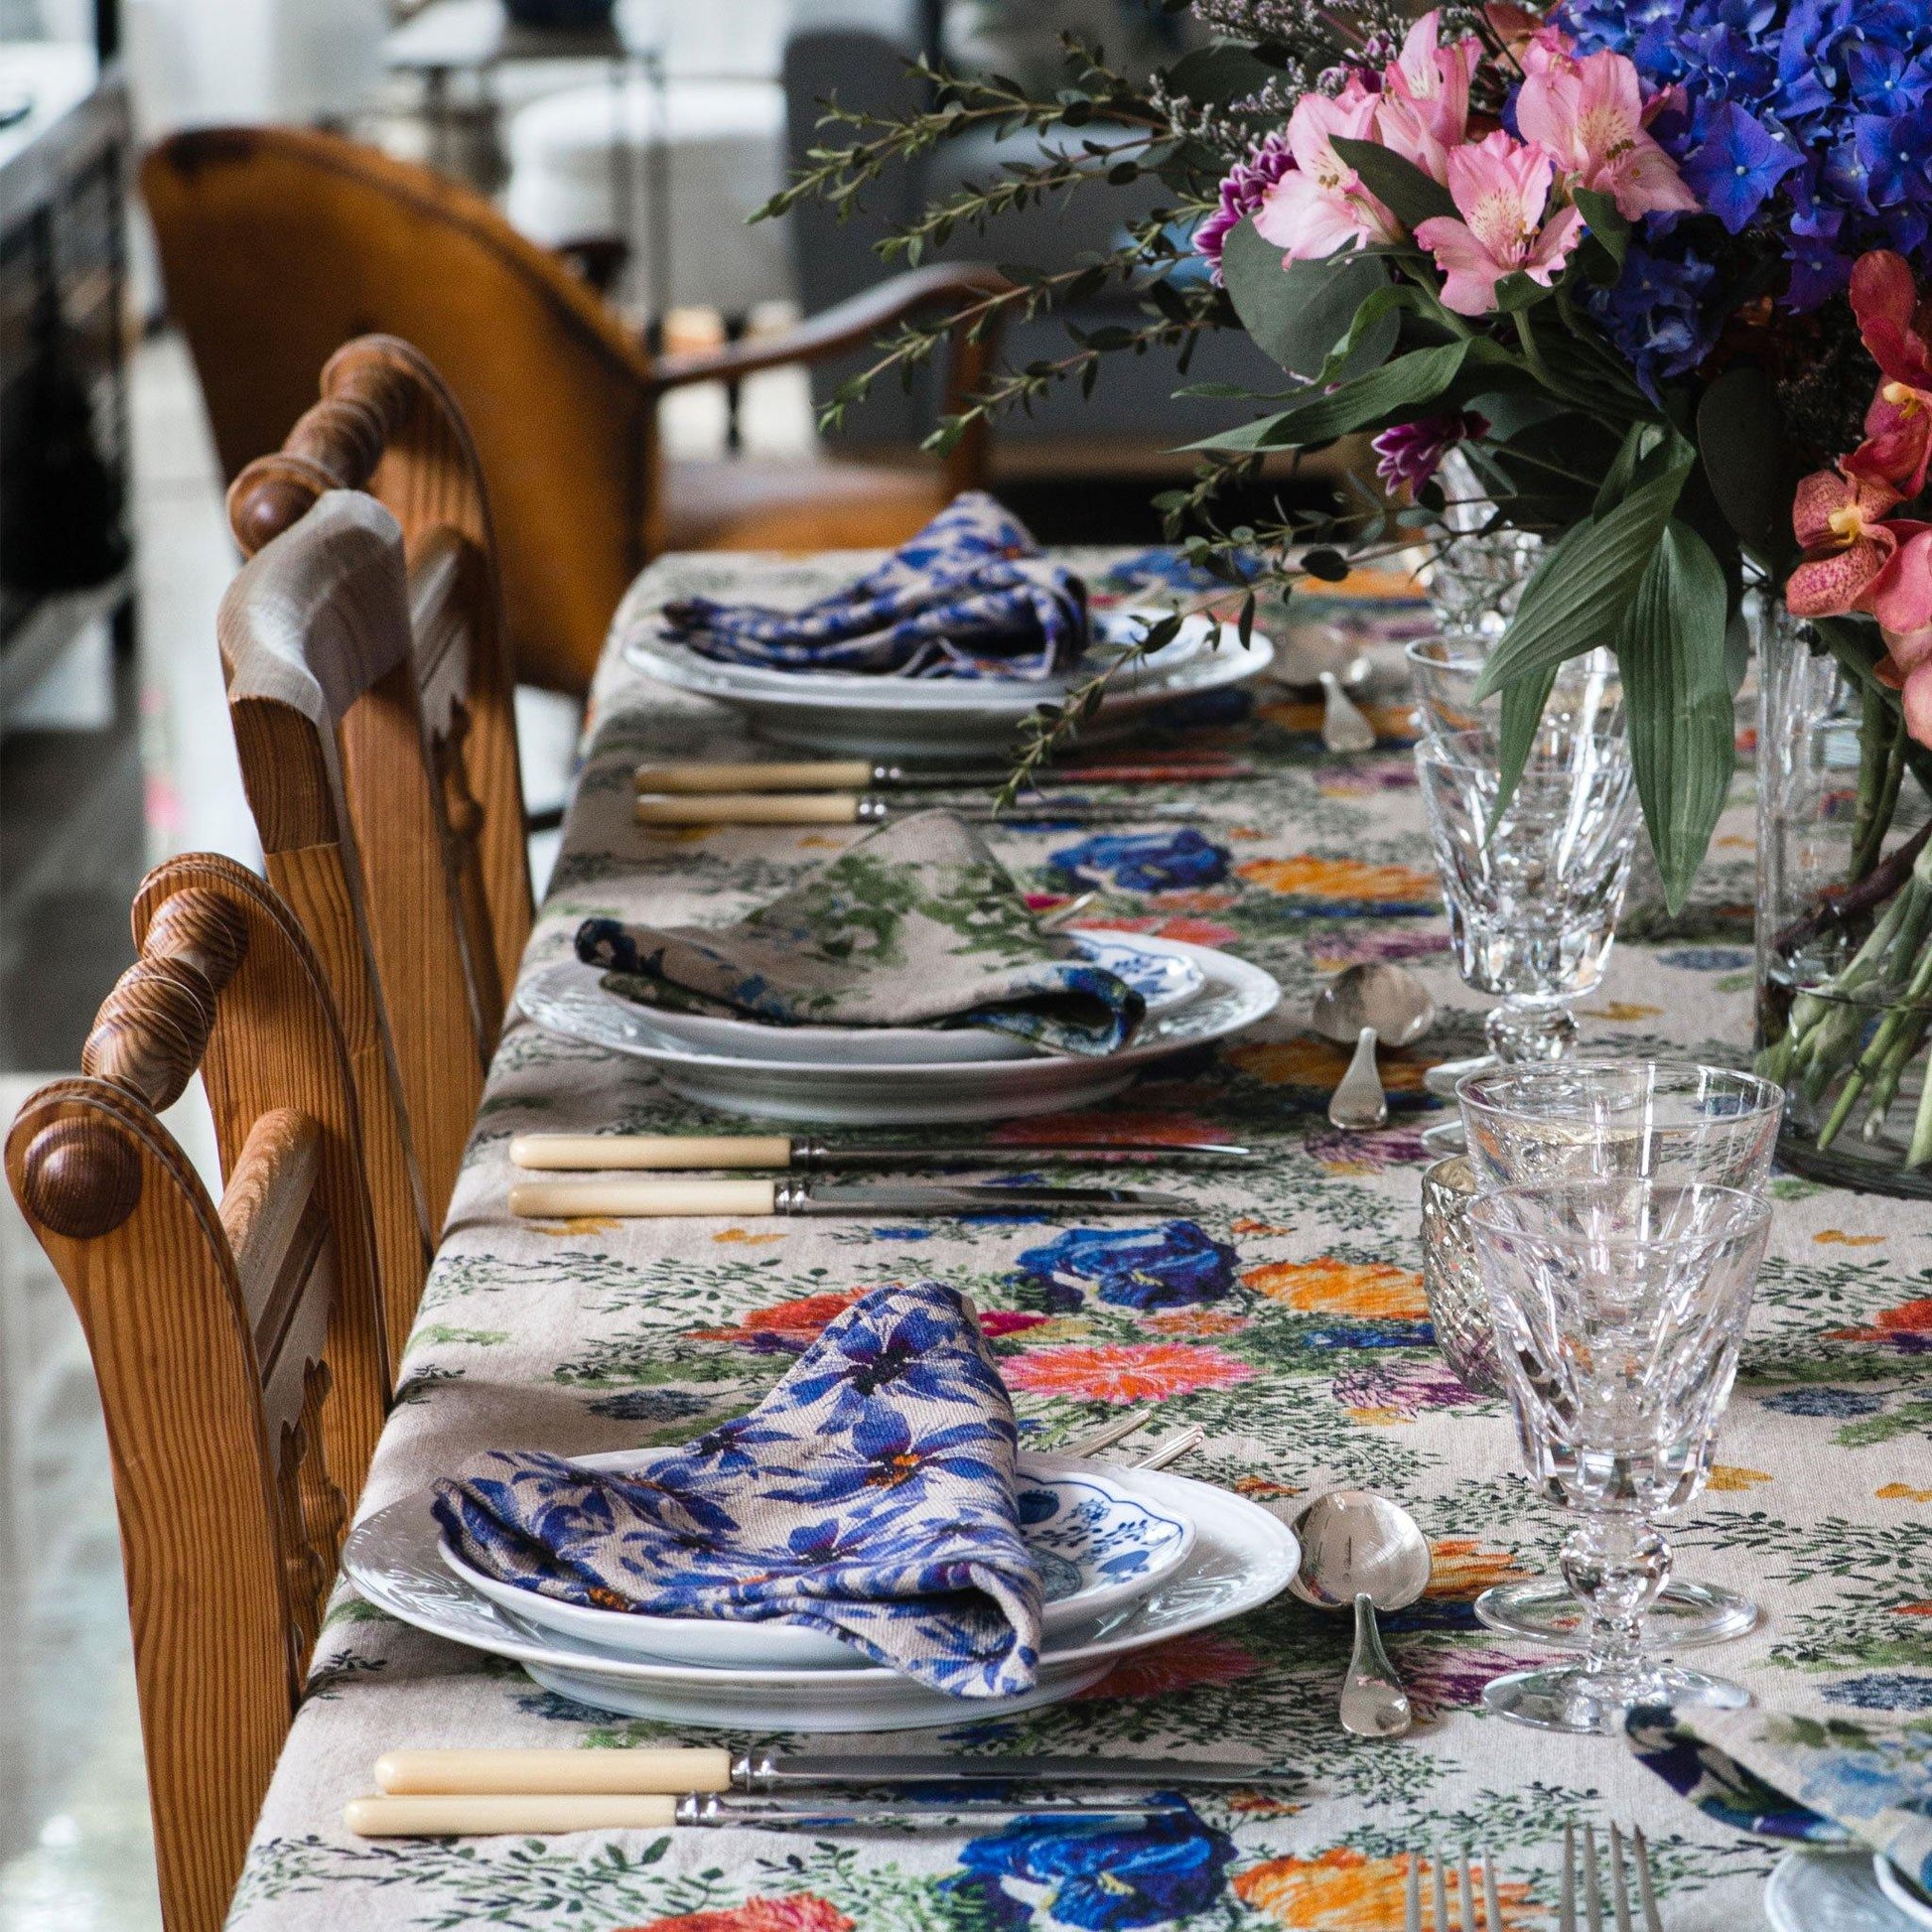 Floral and colorful table scape with organic linen napkins and table cloth.